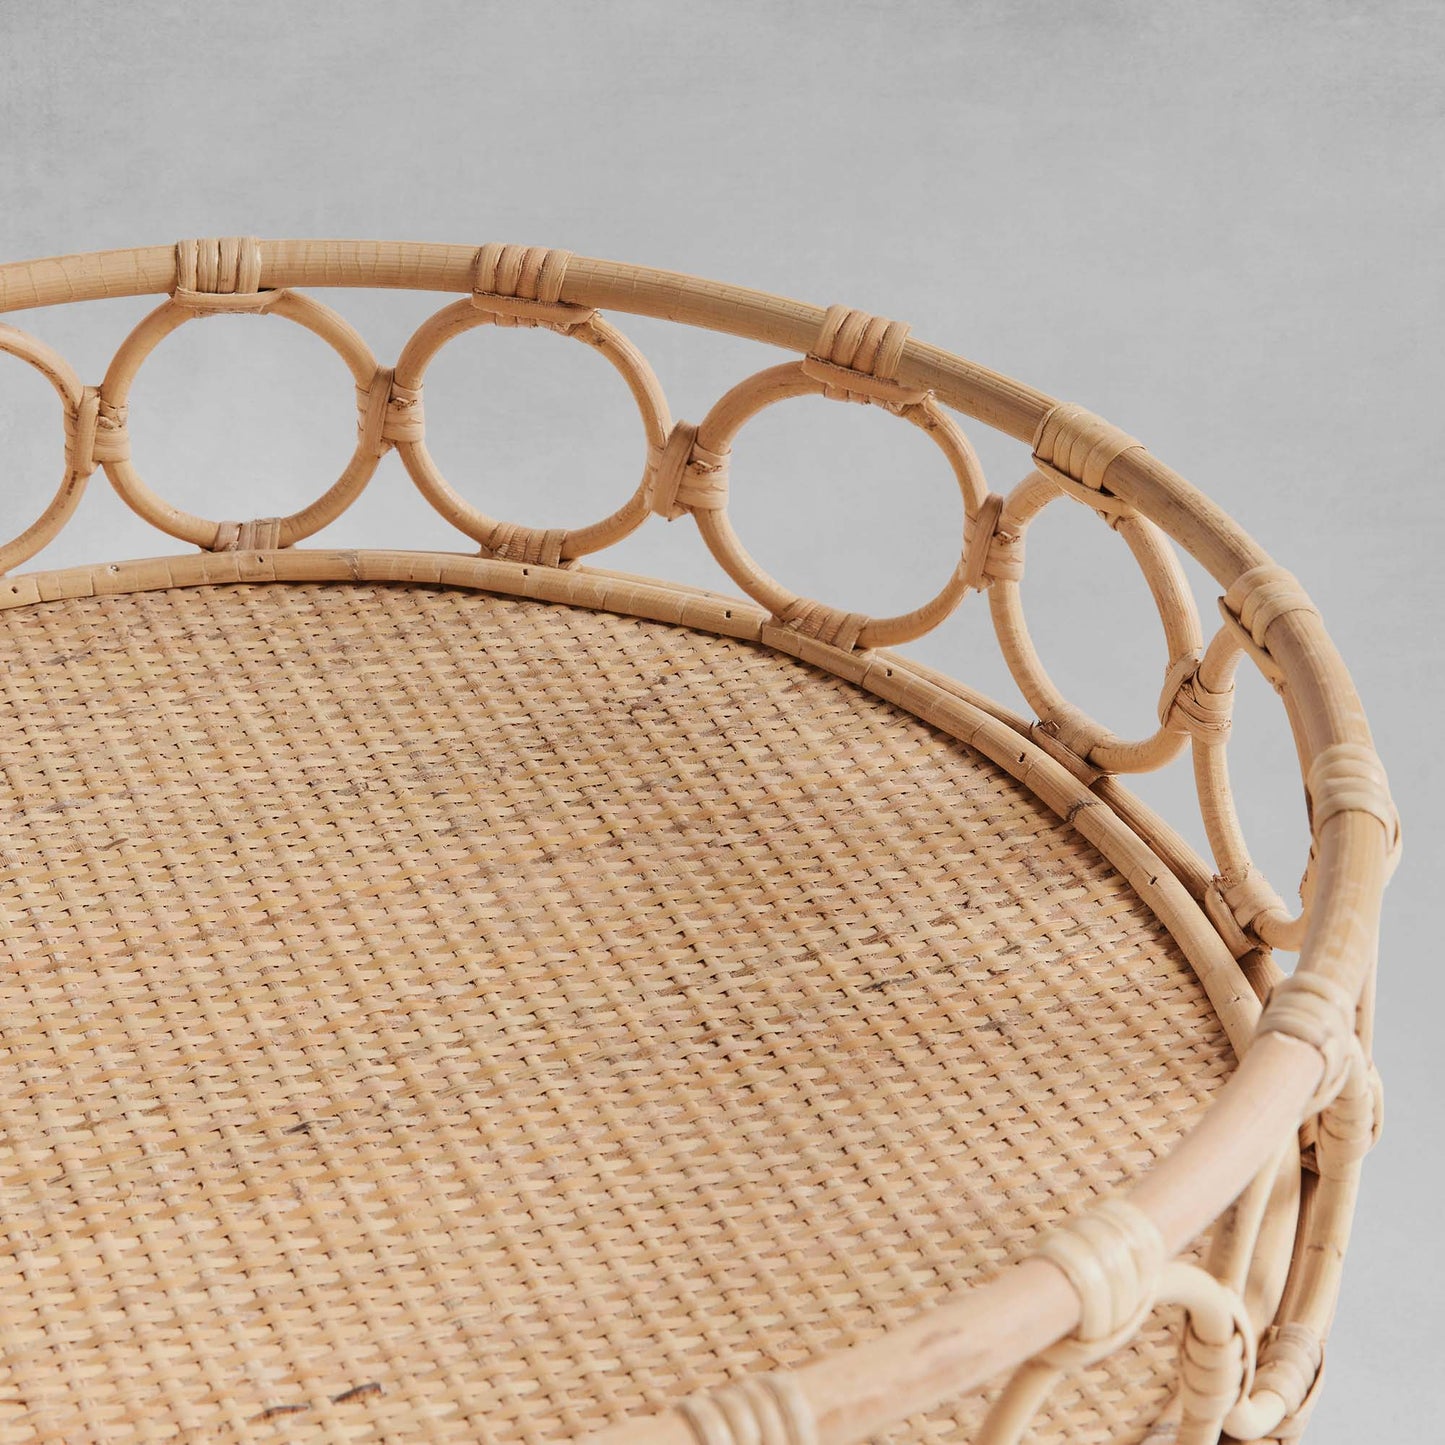 Lattice round rattan serving trays, closeup view, with gray background.